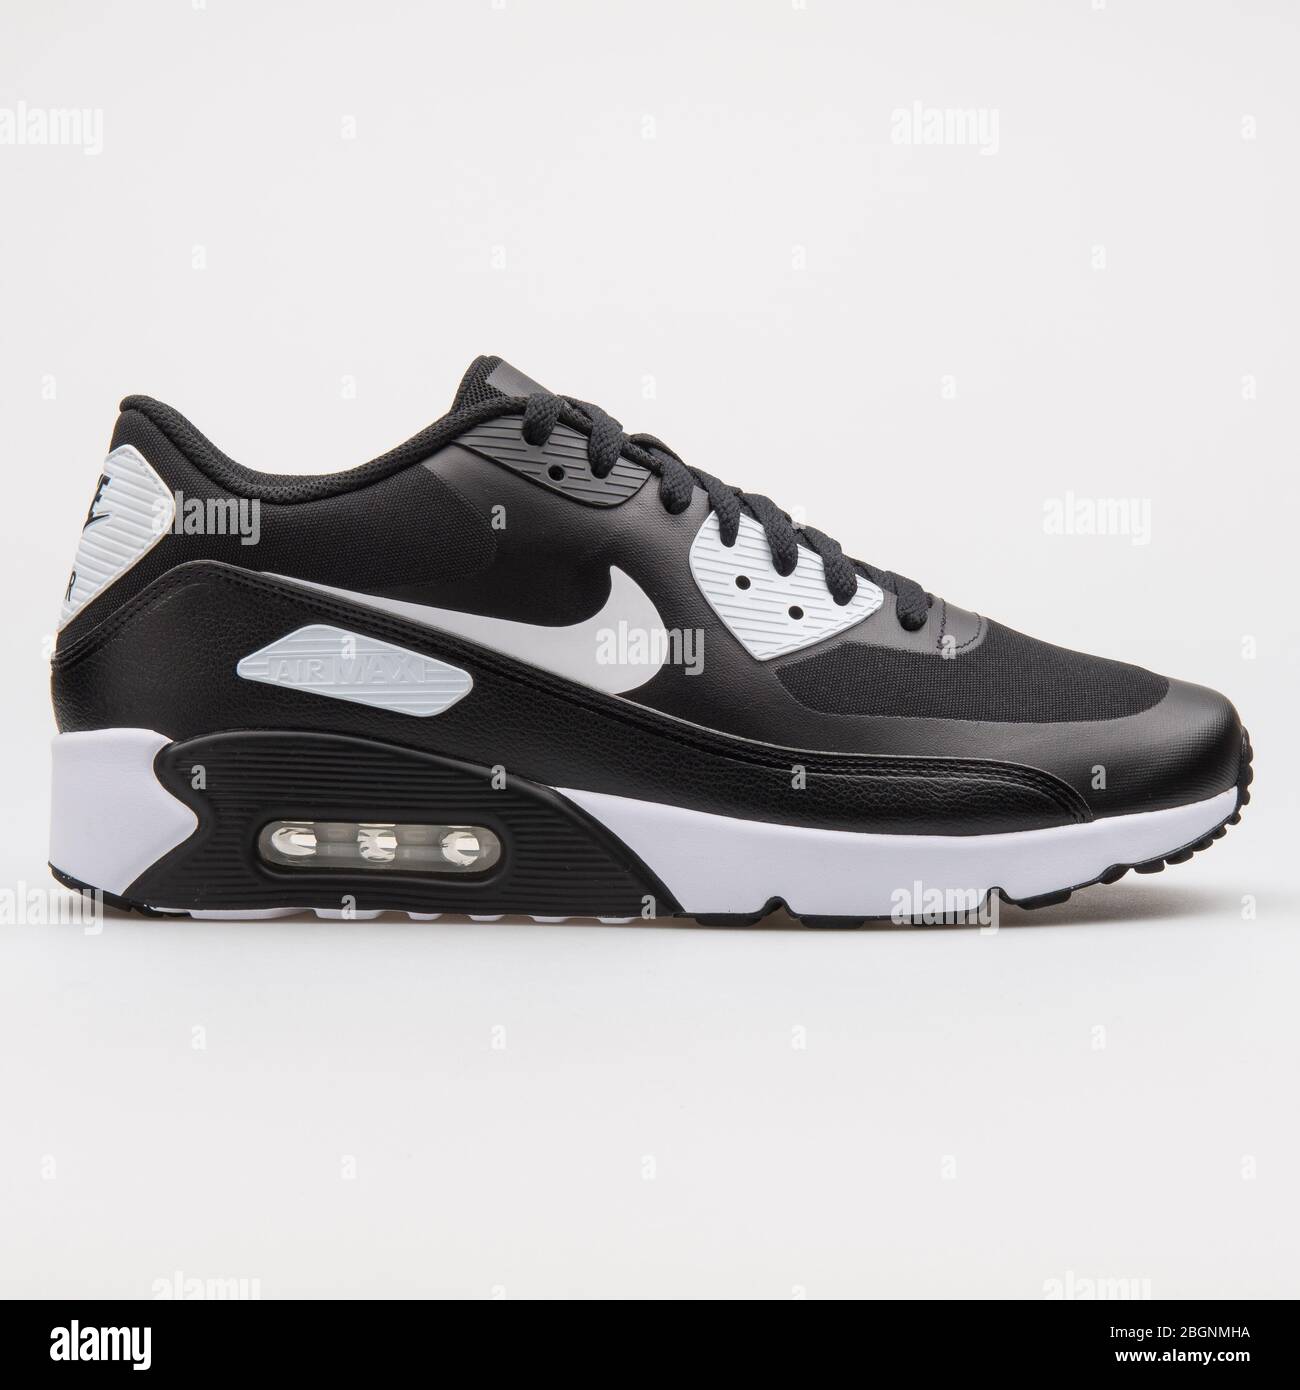 vier keer Leer man VIENNA, AUSTRIA - AUGUST 14, 2017: Nike Air Max 90 Ultra 2.0 Essential  black and white sneaker on white background Stock Photo - Alamy